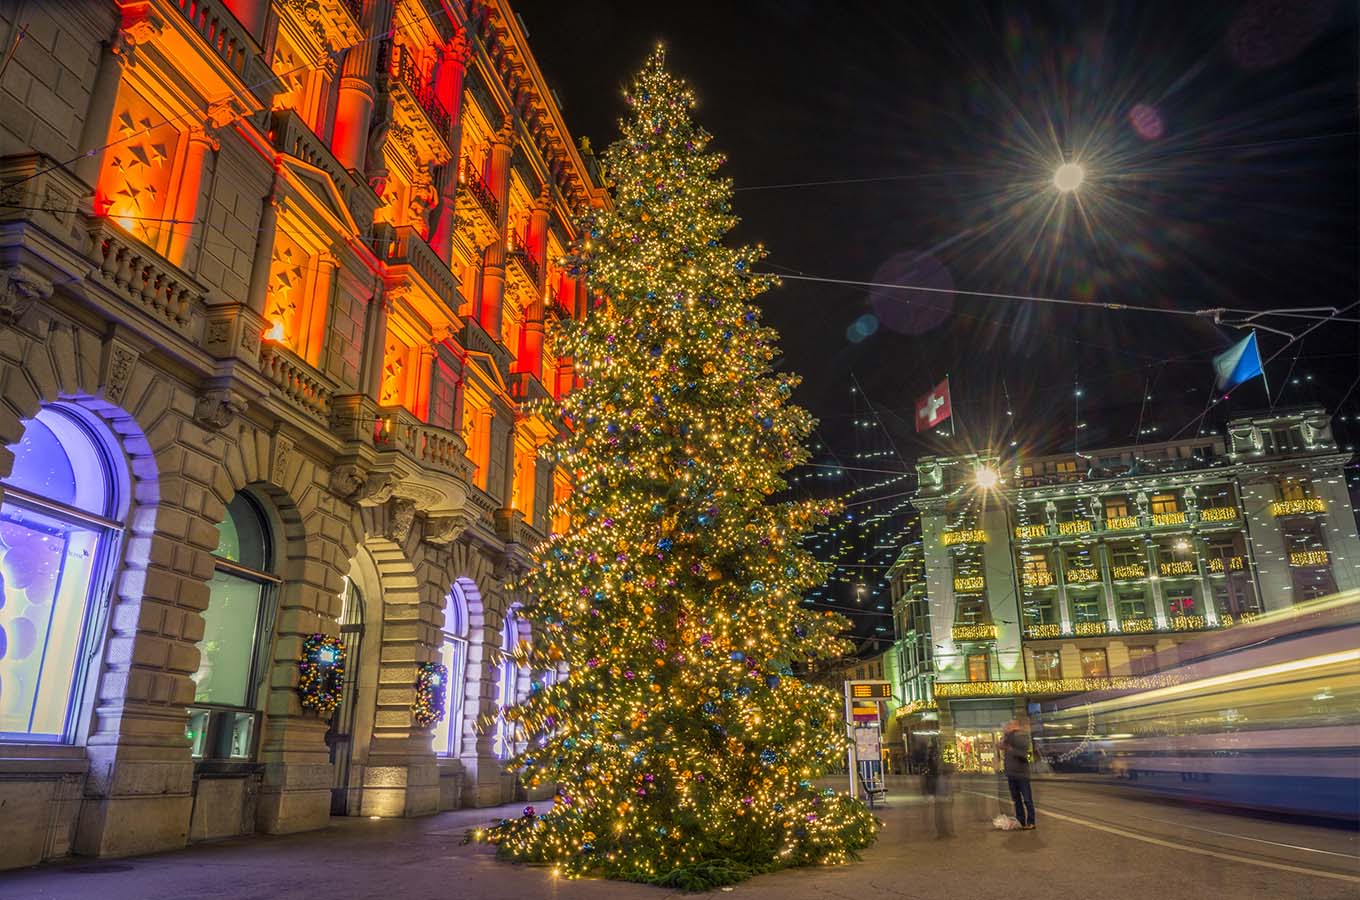 Image of Christmas tree lit up at nighttime in Switzerland. Buildings alongside the tree are lit up with a warm glow and look welcoming and have an ambient atmosphere